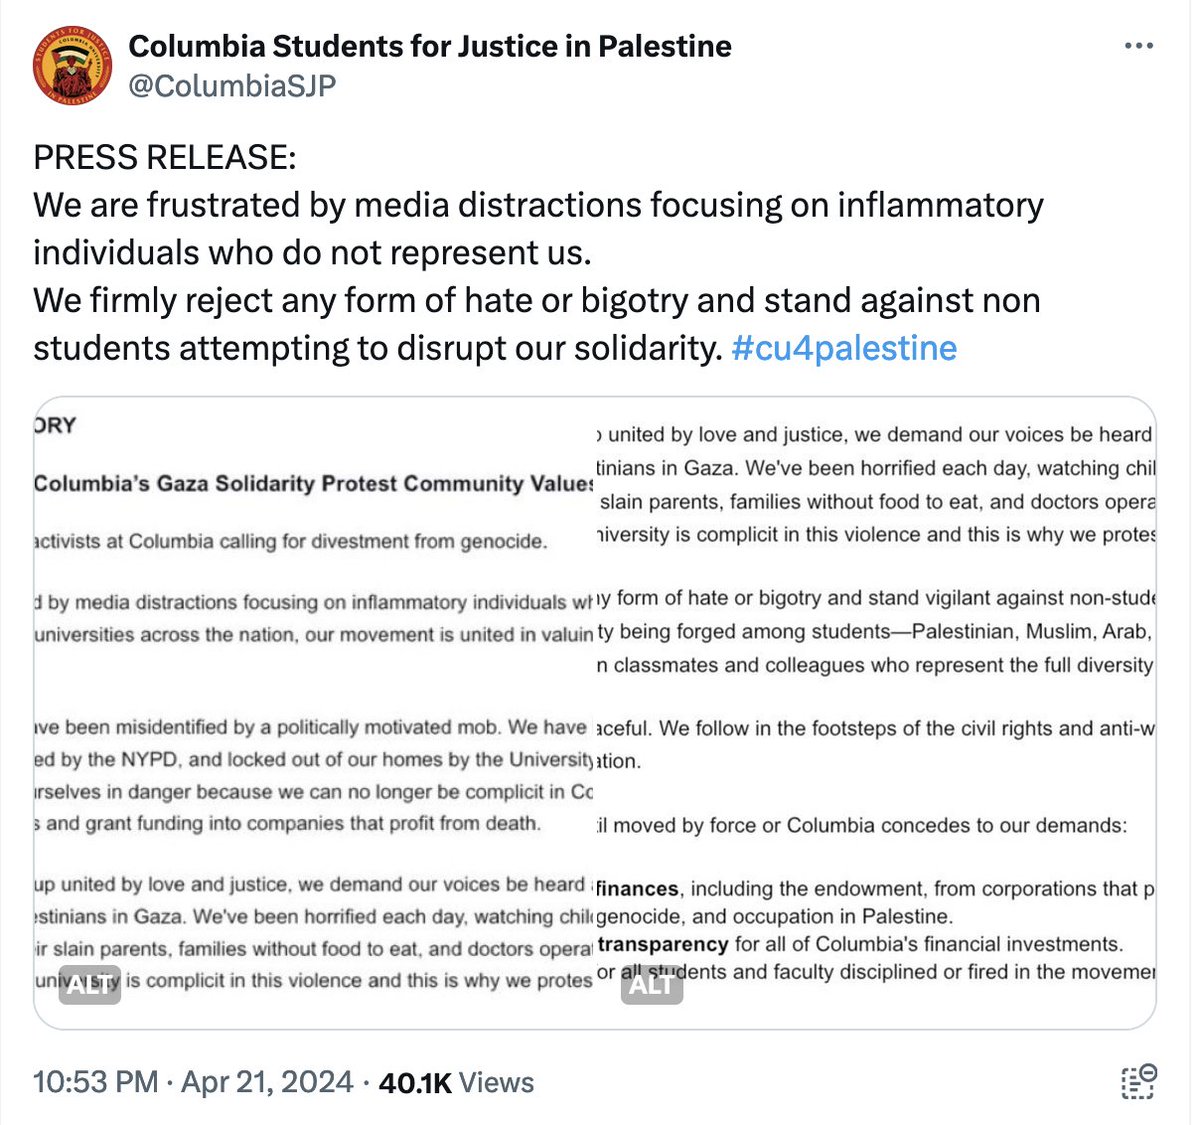 Yes, there have been individuals making vile statements on & around campus. This is wrong, evil & unacceptable. @ColumbiaSJP has publicly & clearly disavowed this. To let a minority of vile voices drown out the true message of the majority of student protesters is irresponsible.